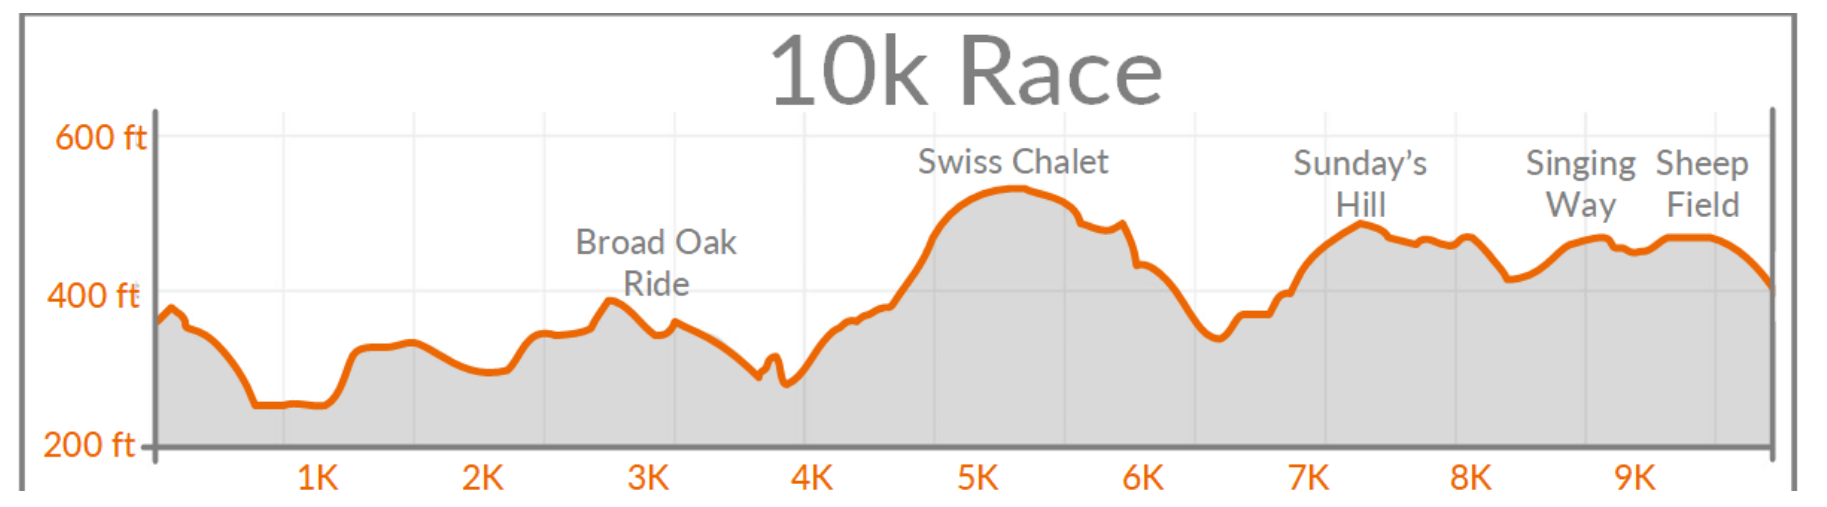 elevation profile of the race route